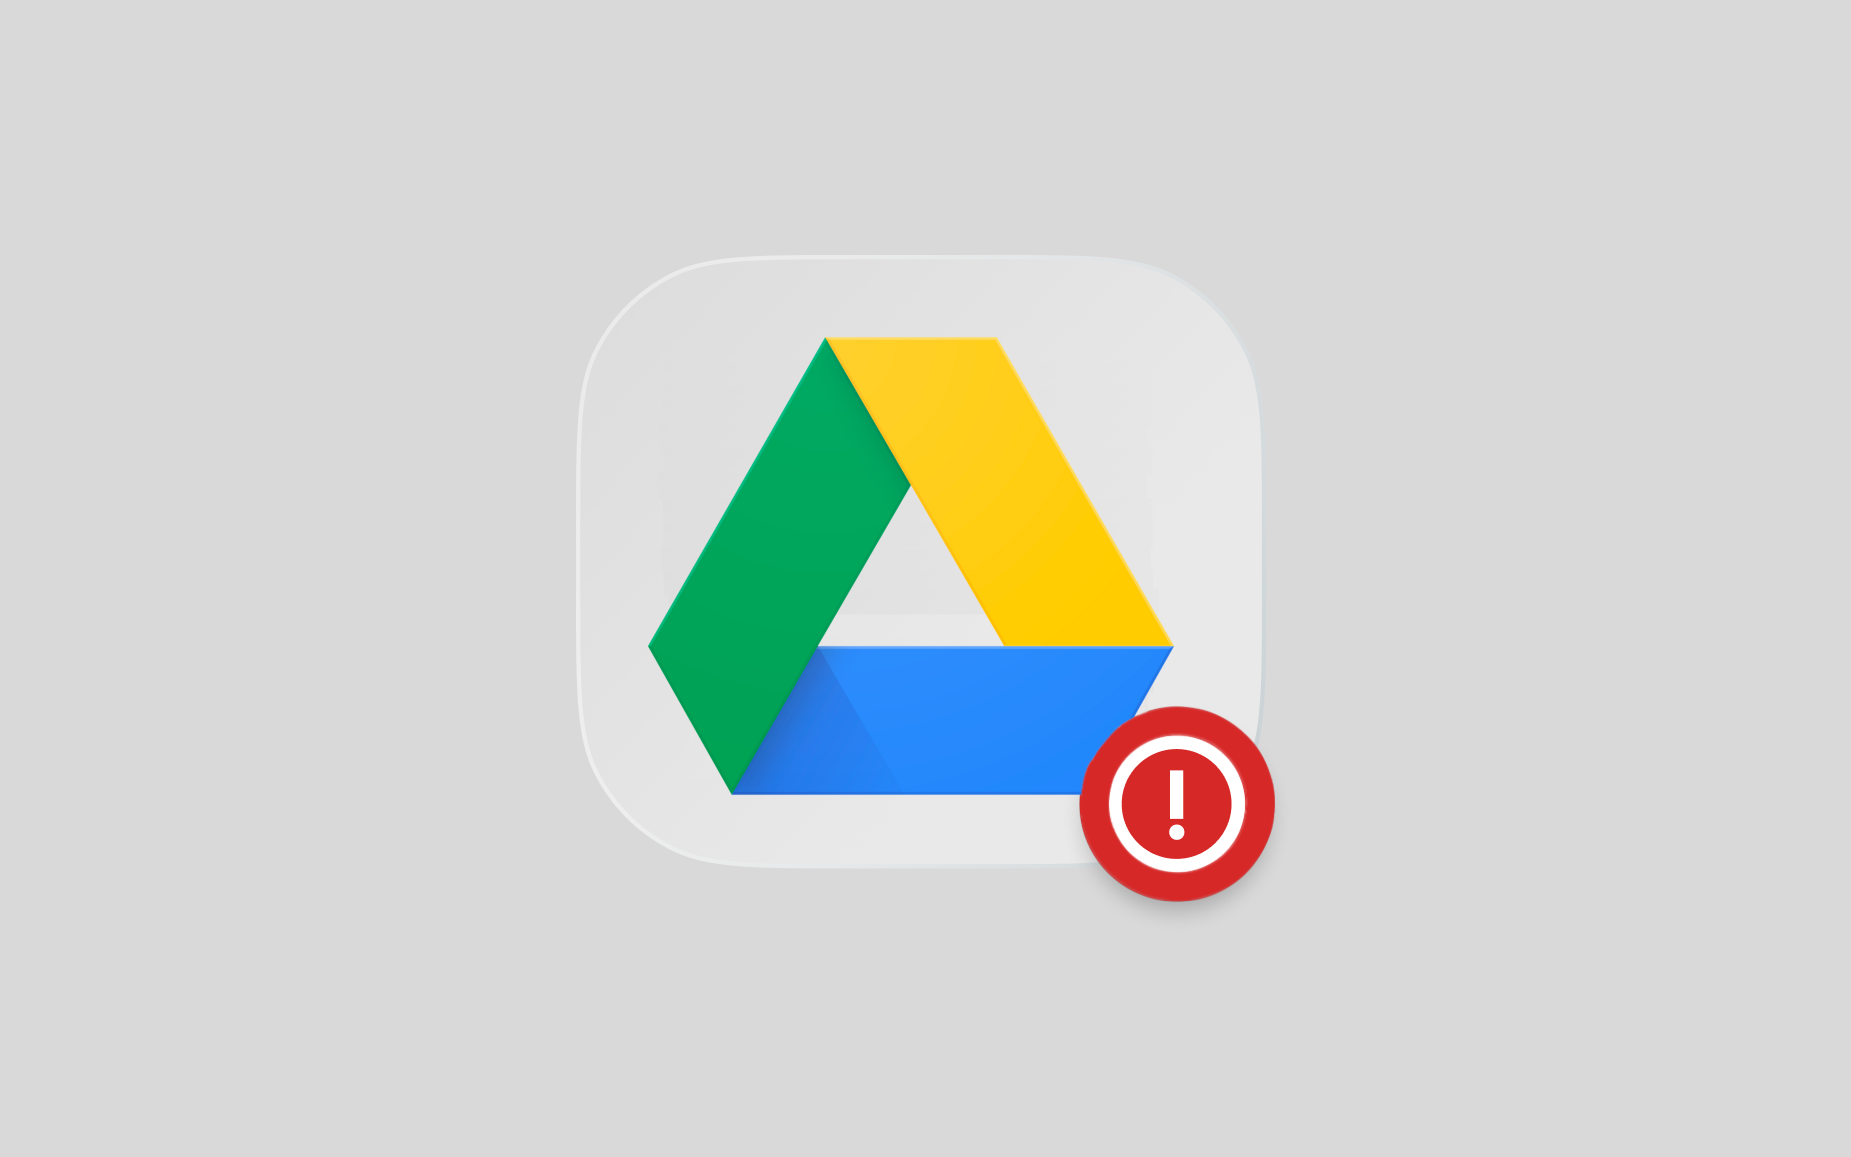 Google Drive logo with red security warning badge.